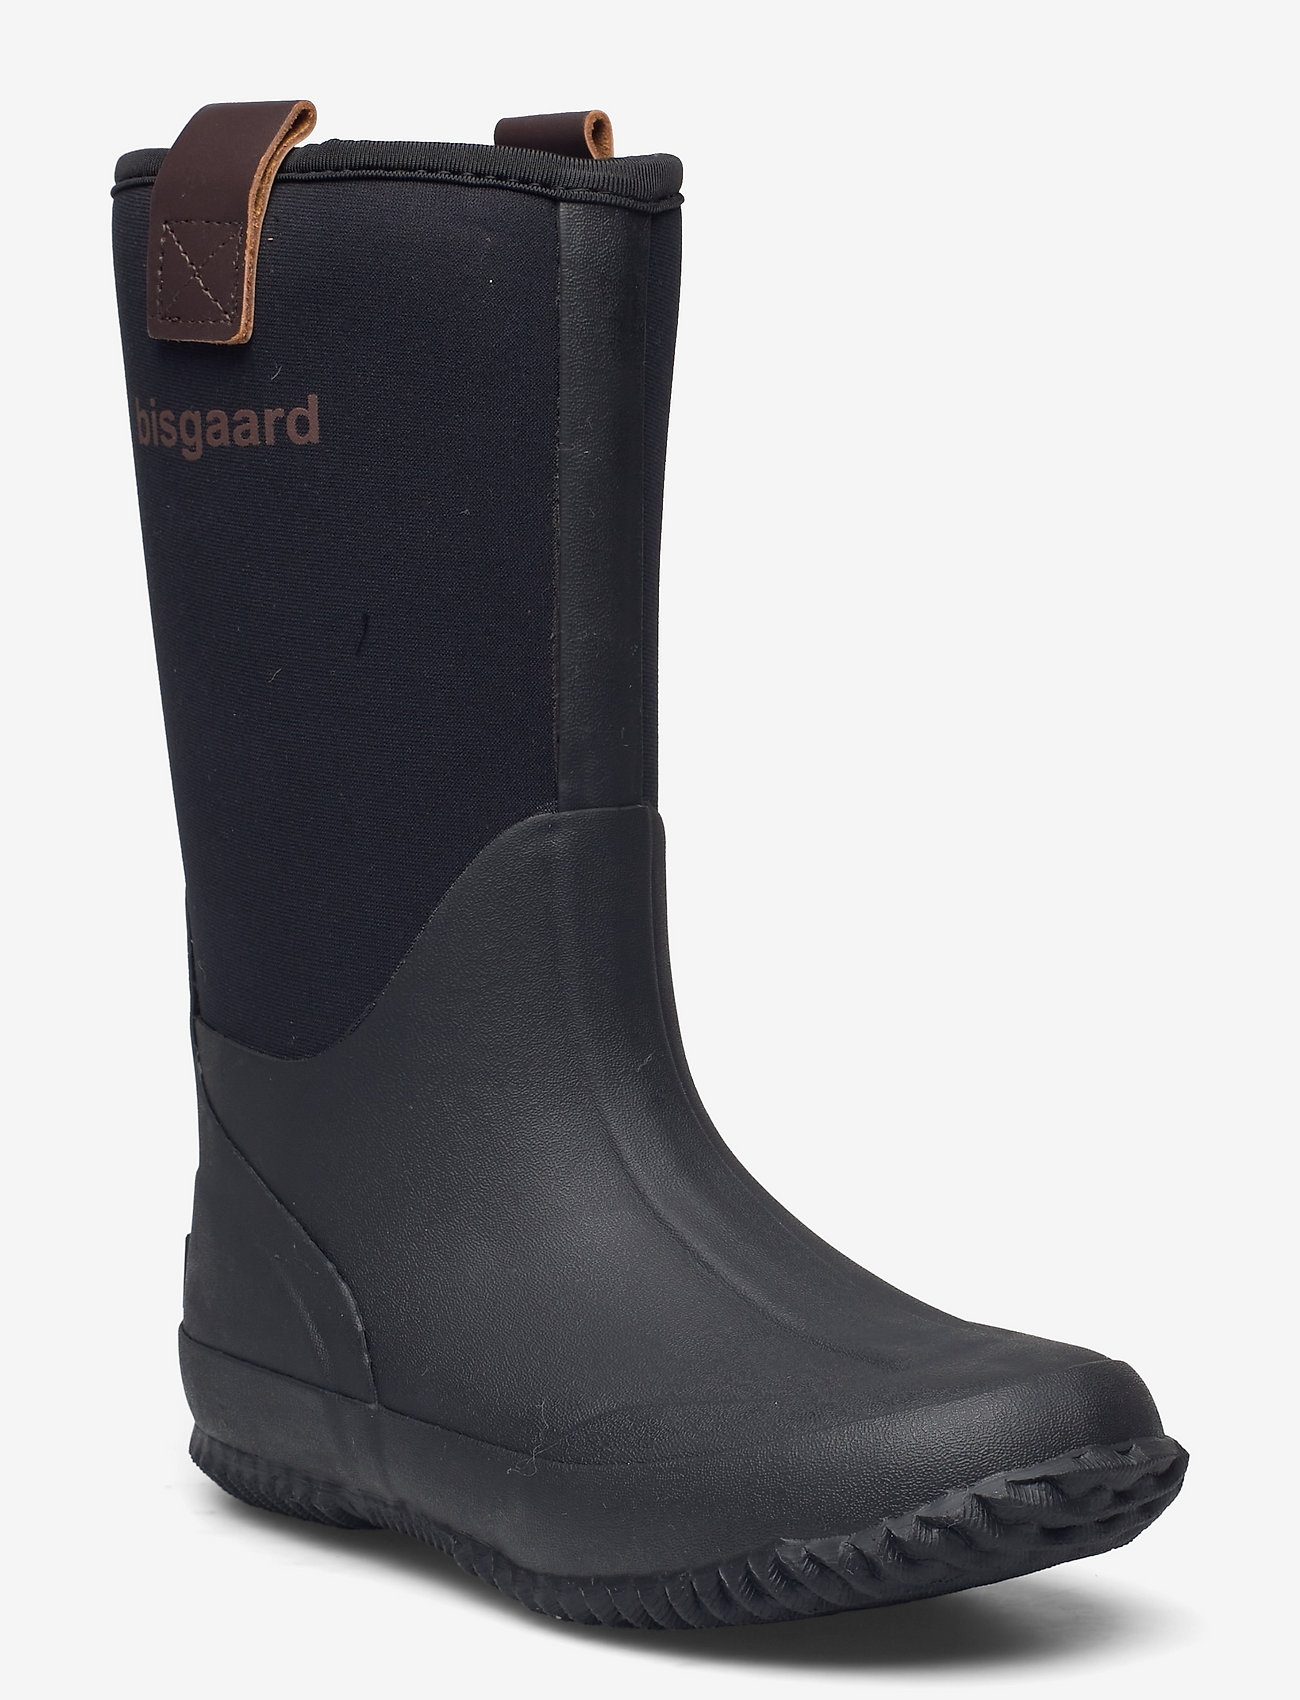 Bisgaard - bisgaard neo thermo - lined rubberboots - black - 0